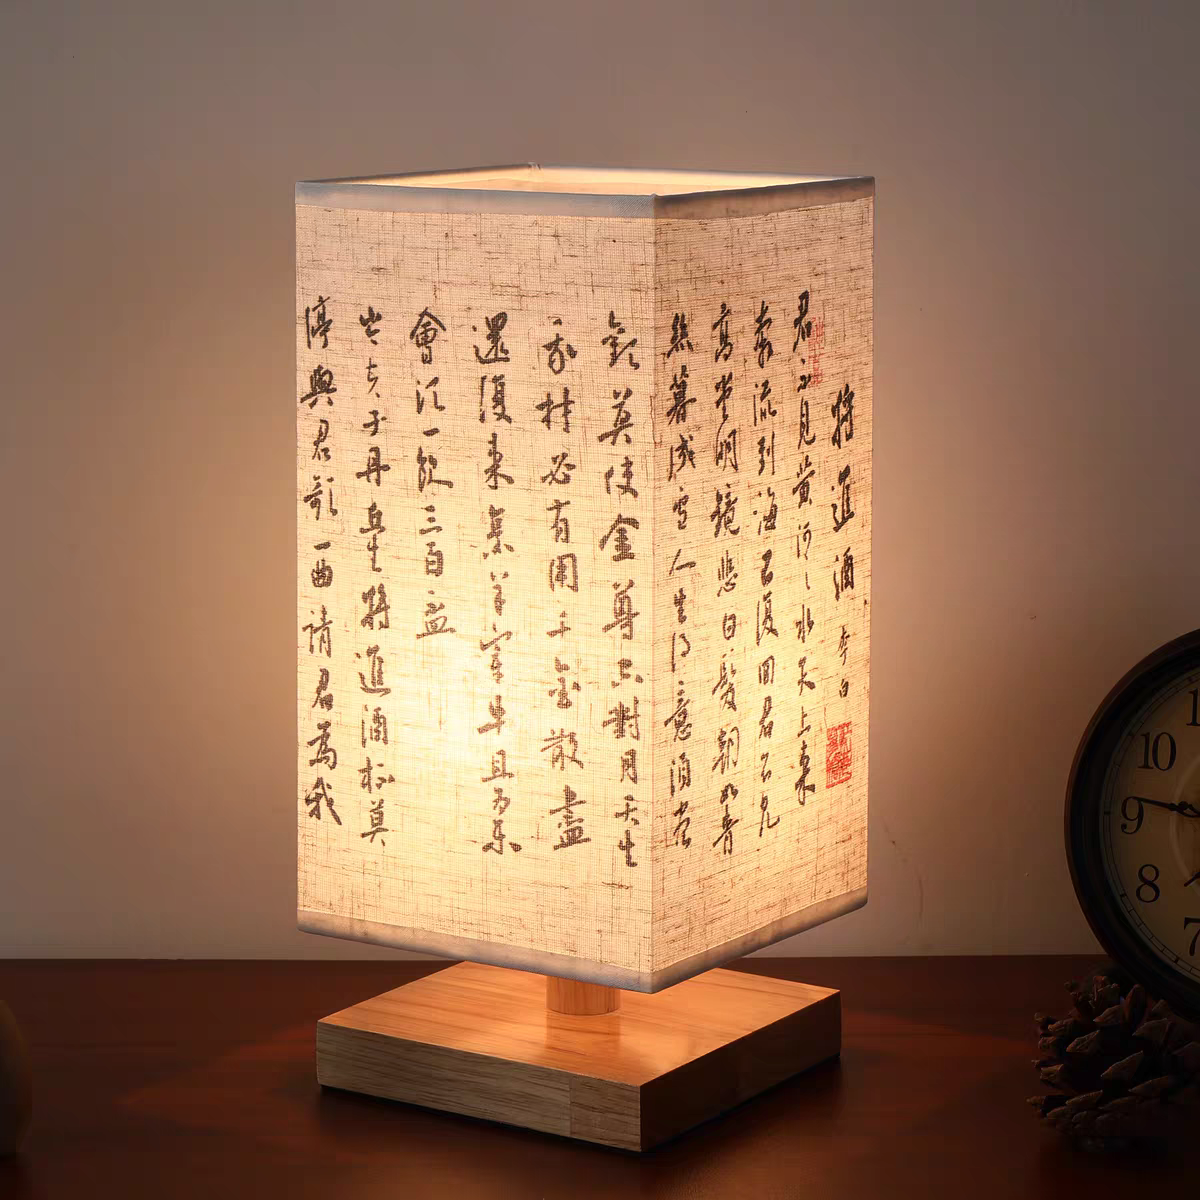 Lamp of Chinese Calligraph and Painting.